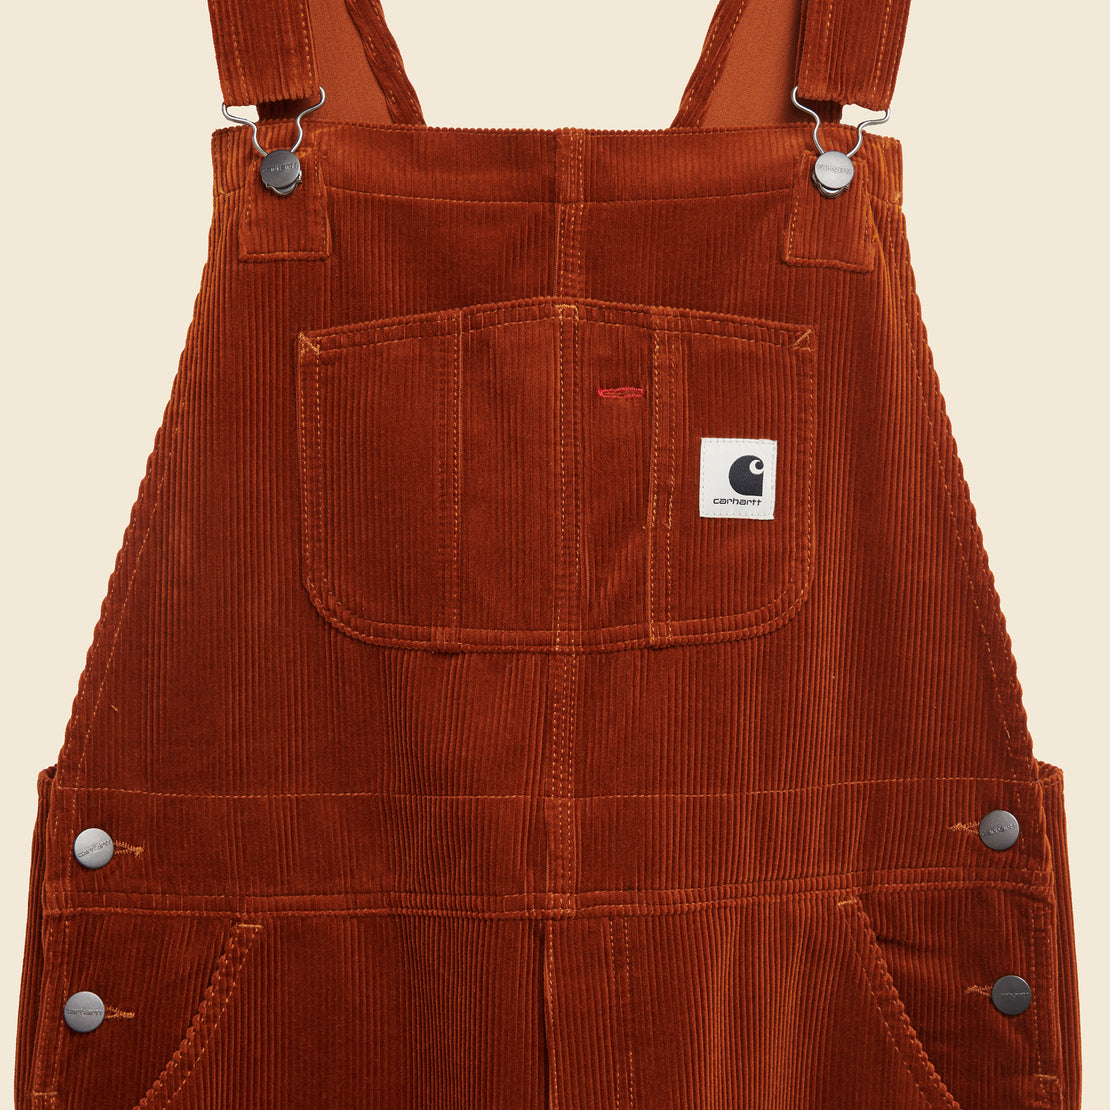 Bib Straight Overall - Brandy - Carhartt WIP - STAG Provisions - W - Onepiece - Overalls